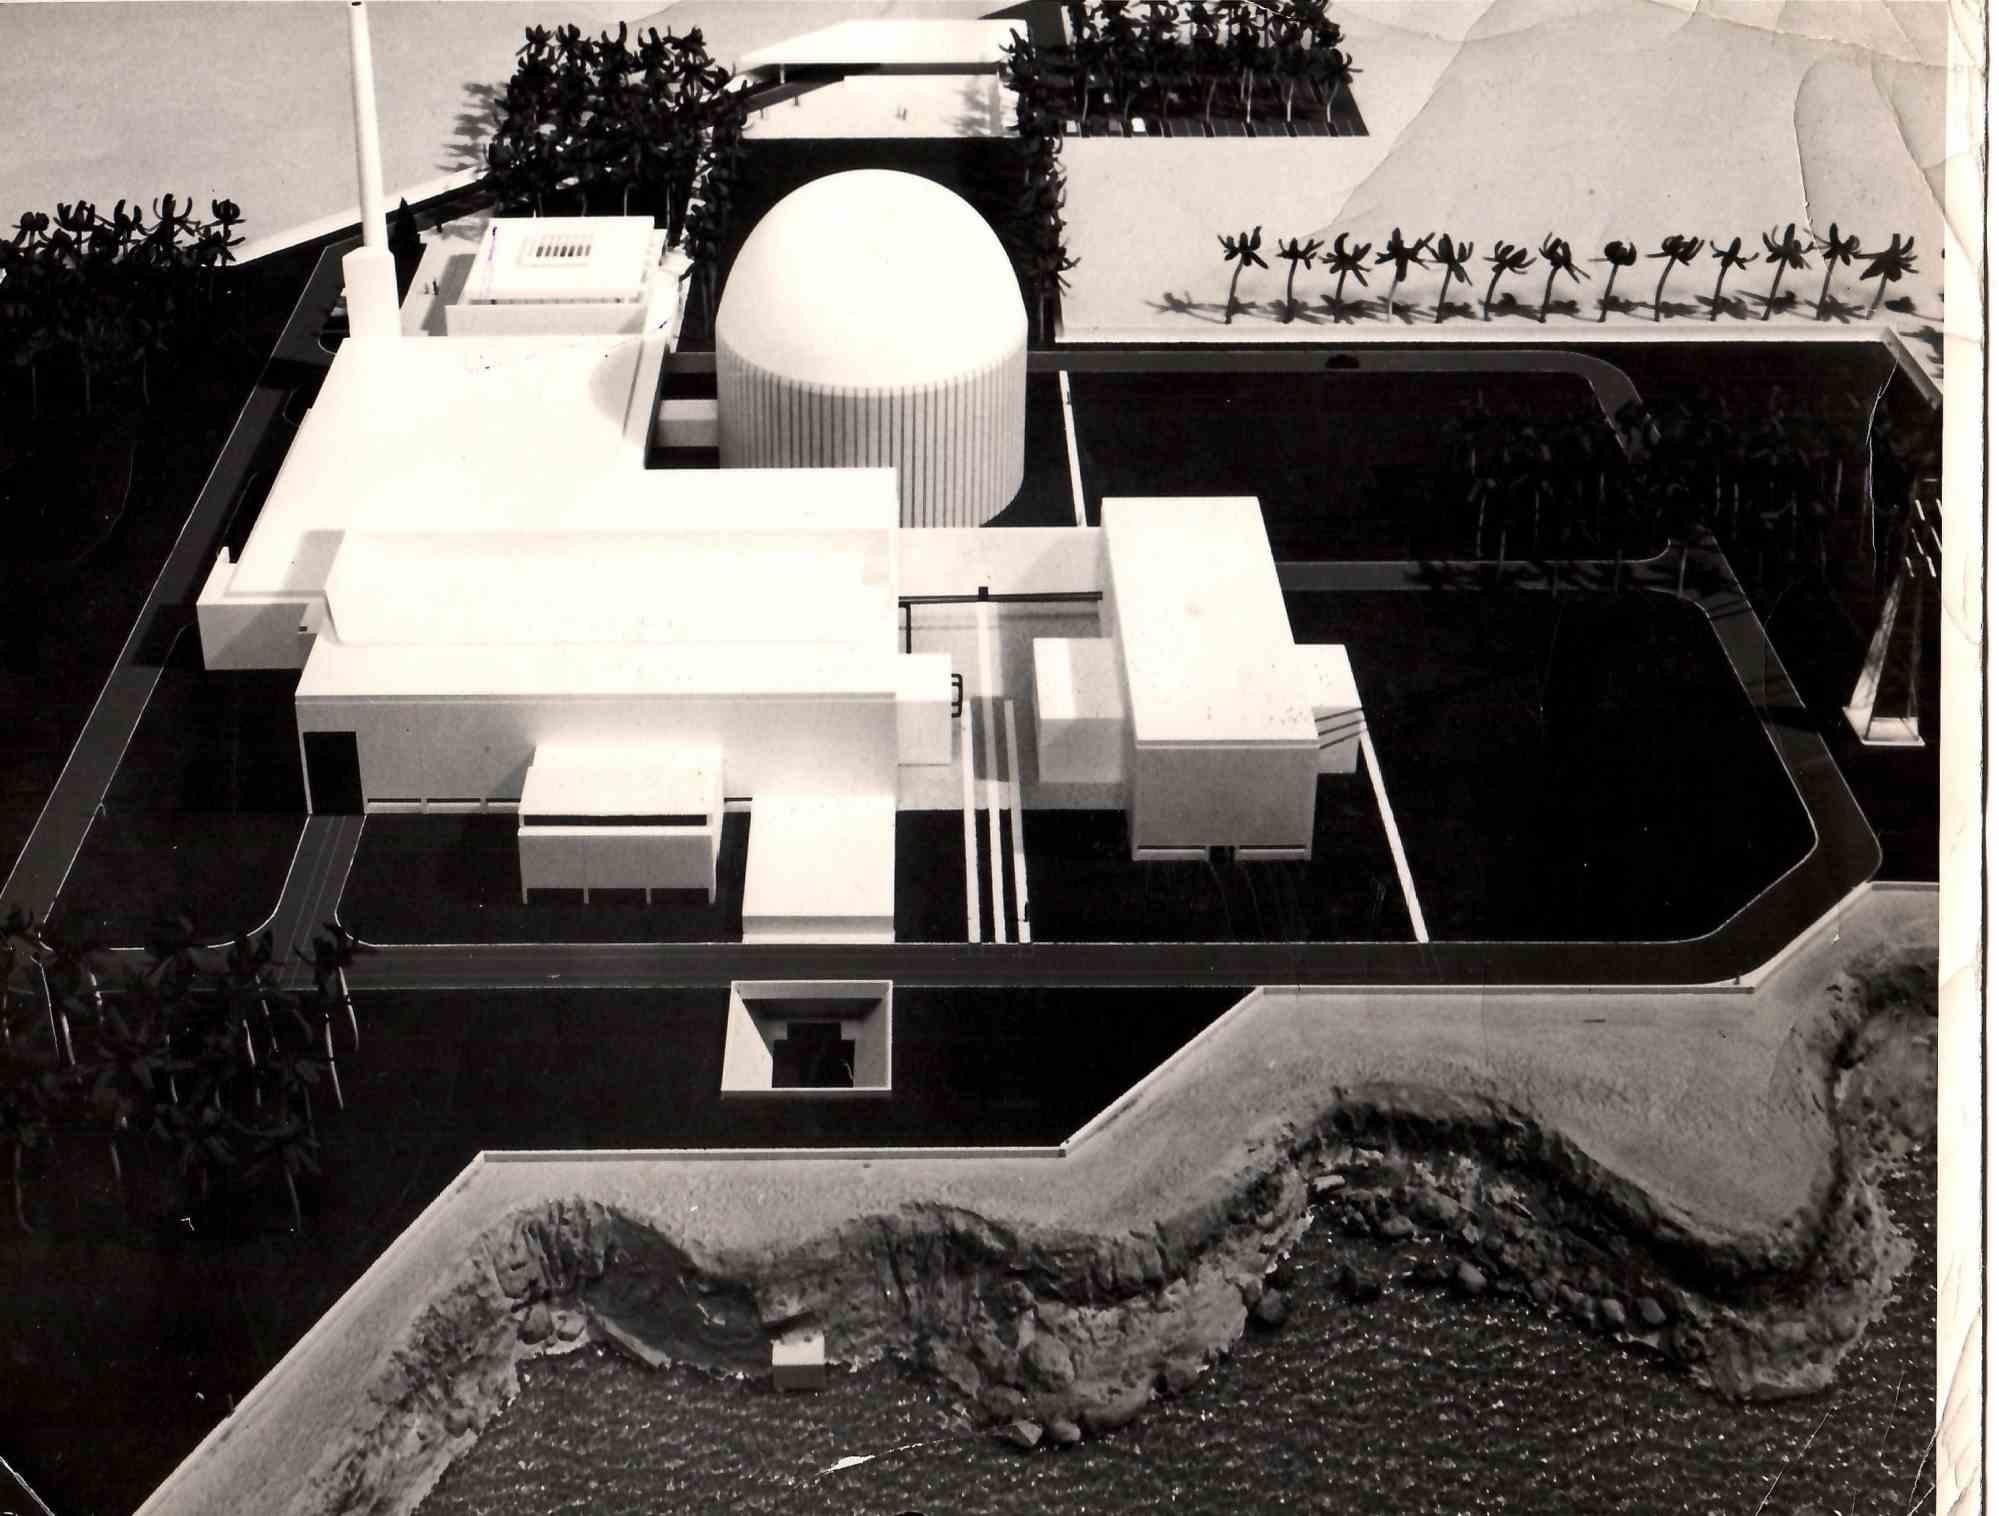 Unknown Black and White Photograph - Scale Model of Karachi Nuclear Power Project - Vintage Photograph - 1961